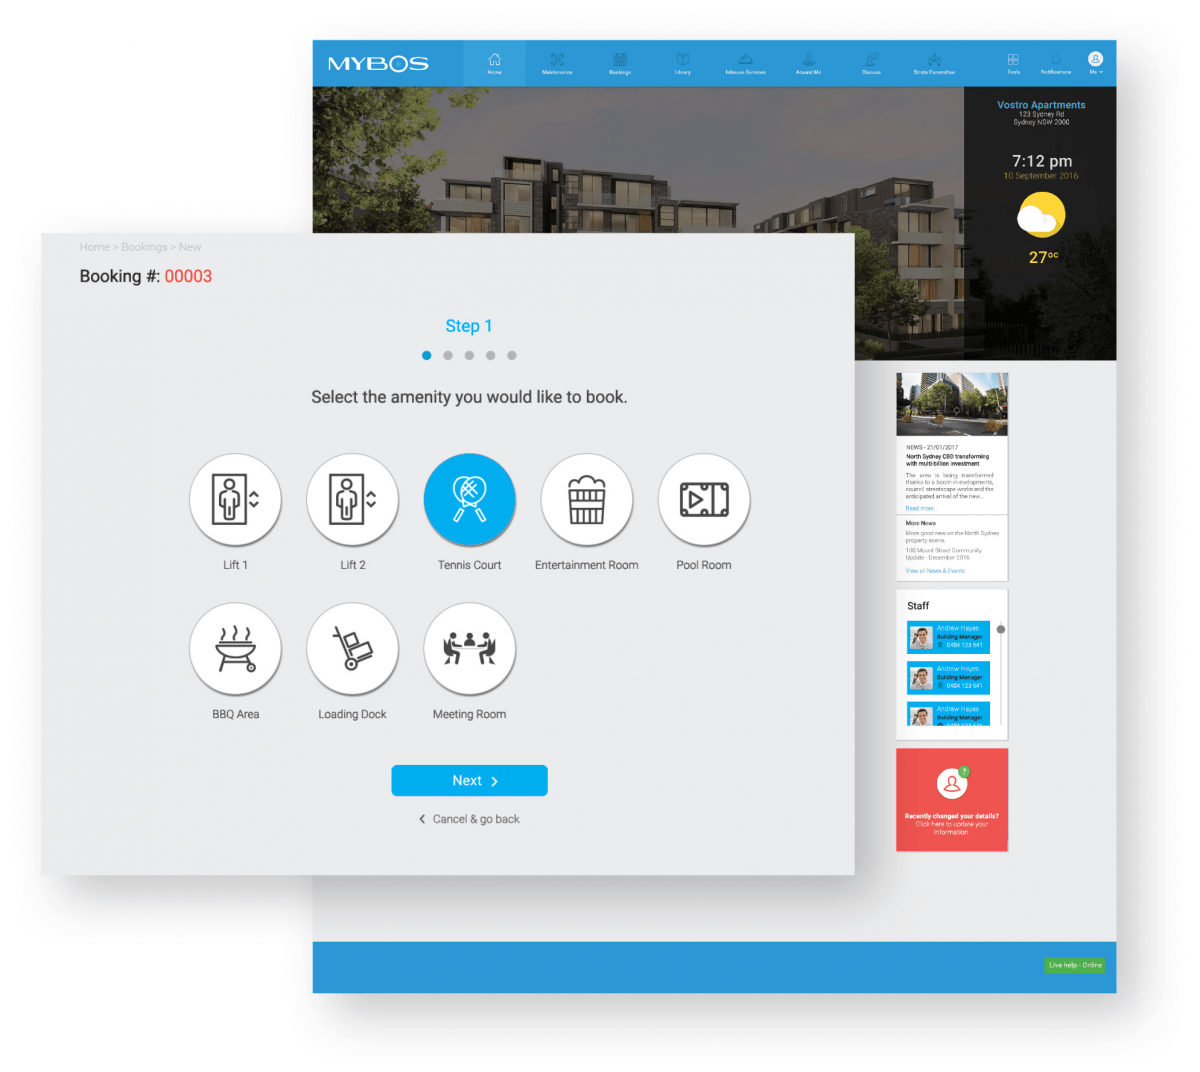 MYBOS Software - Manage the property’s amenity bookings with MYBOS calendar bookings